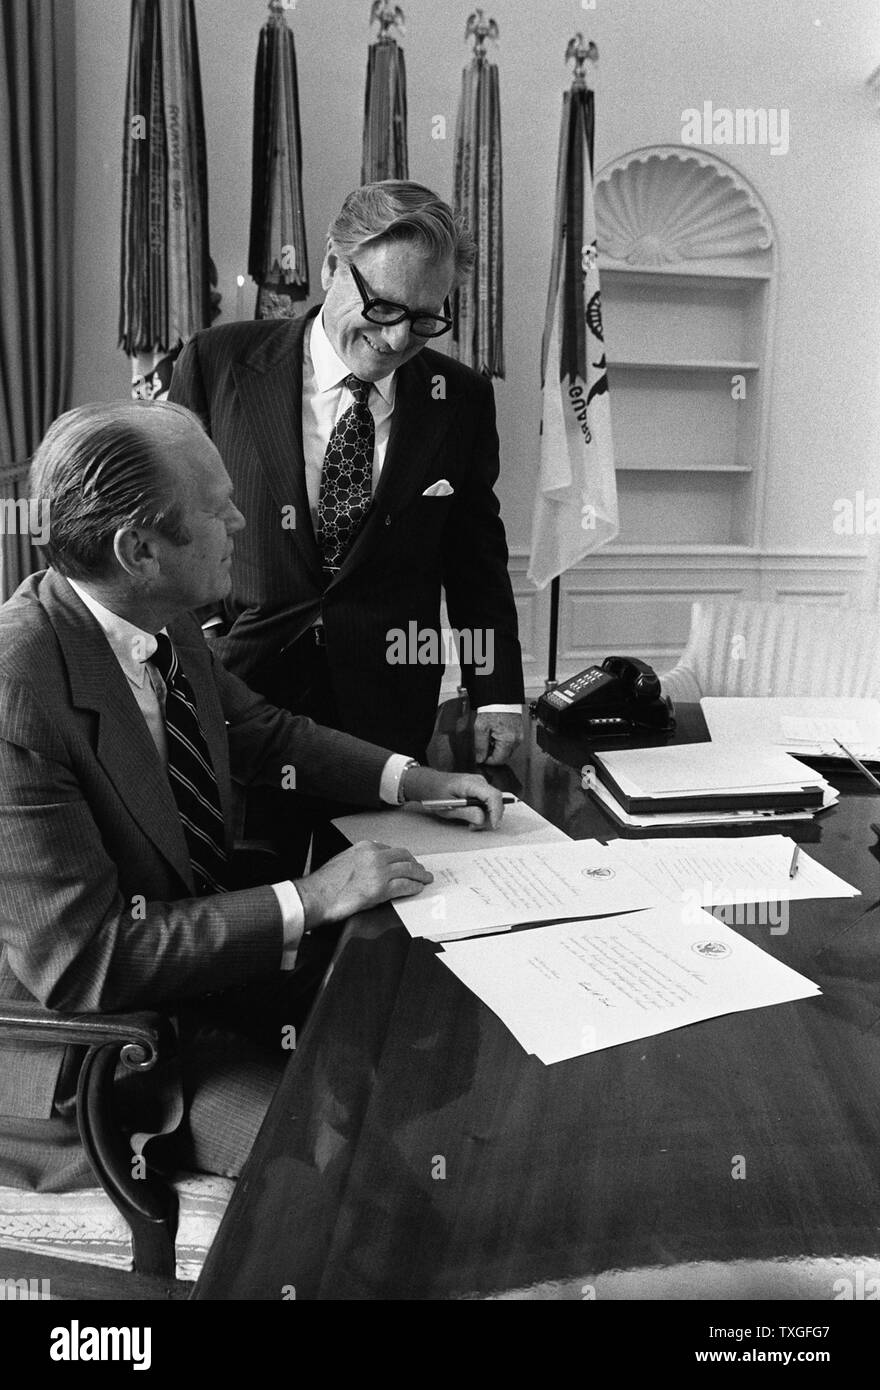 Gerald Ford Prepares For Debate In Oval Office 8 x 10 Silver Halide Photo 